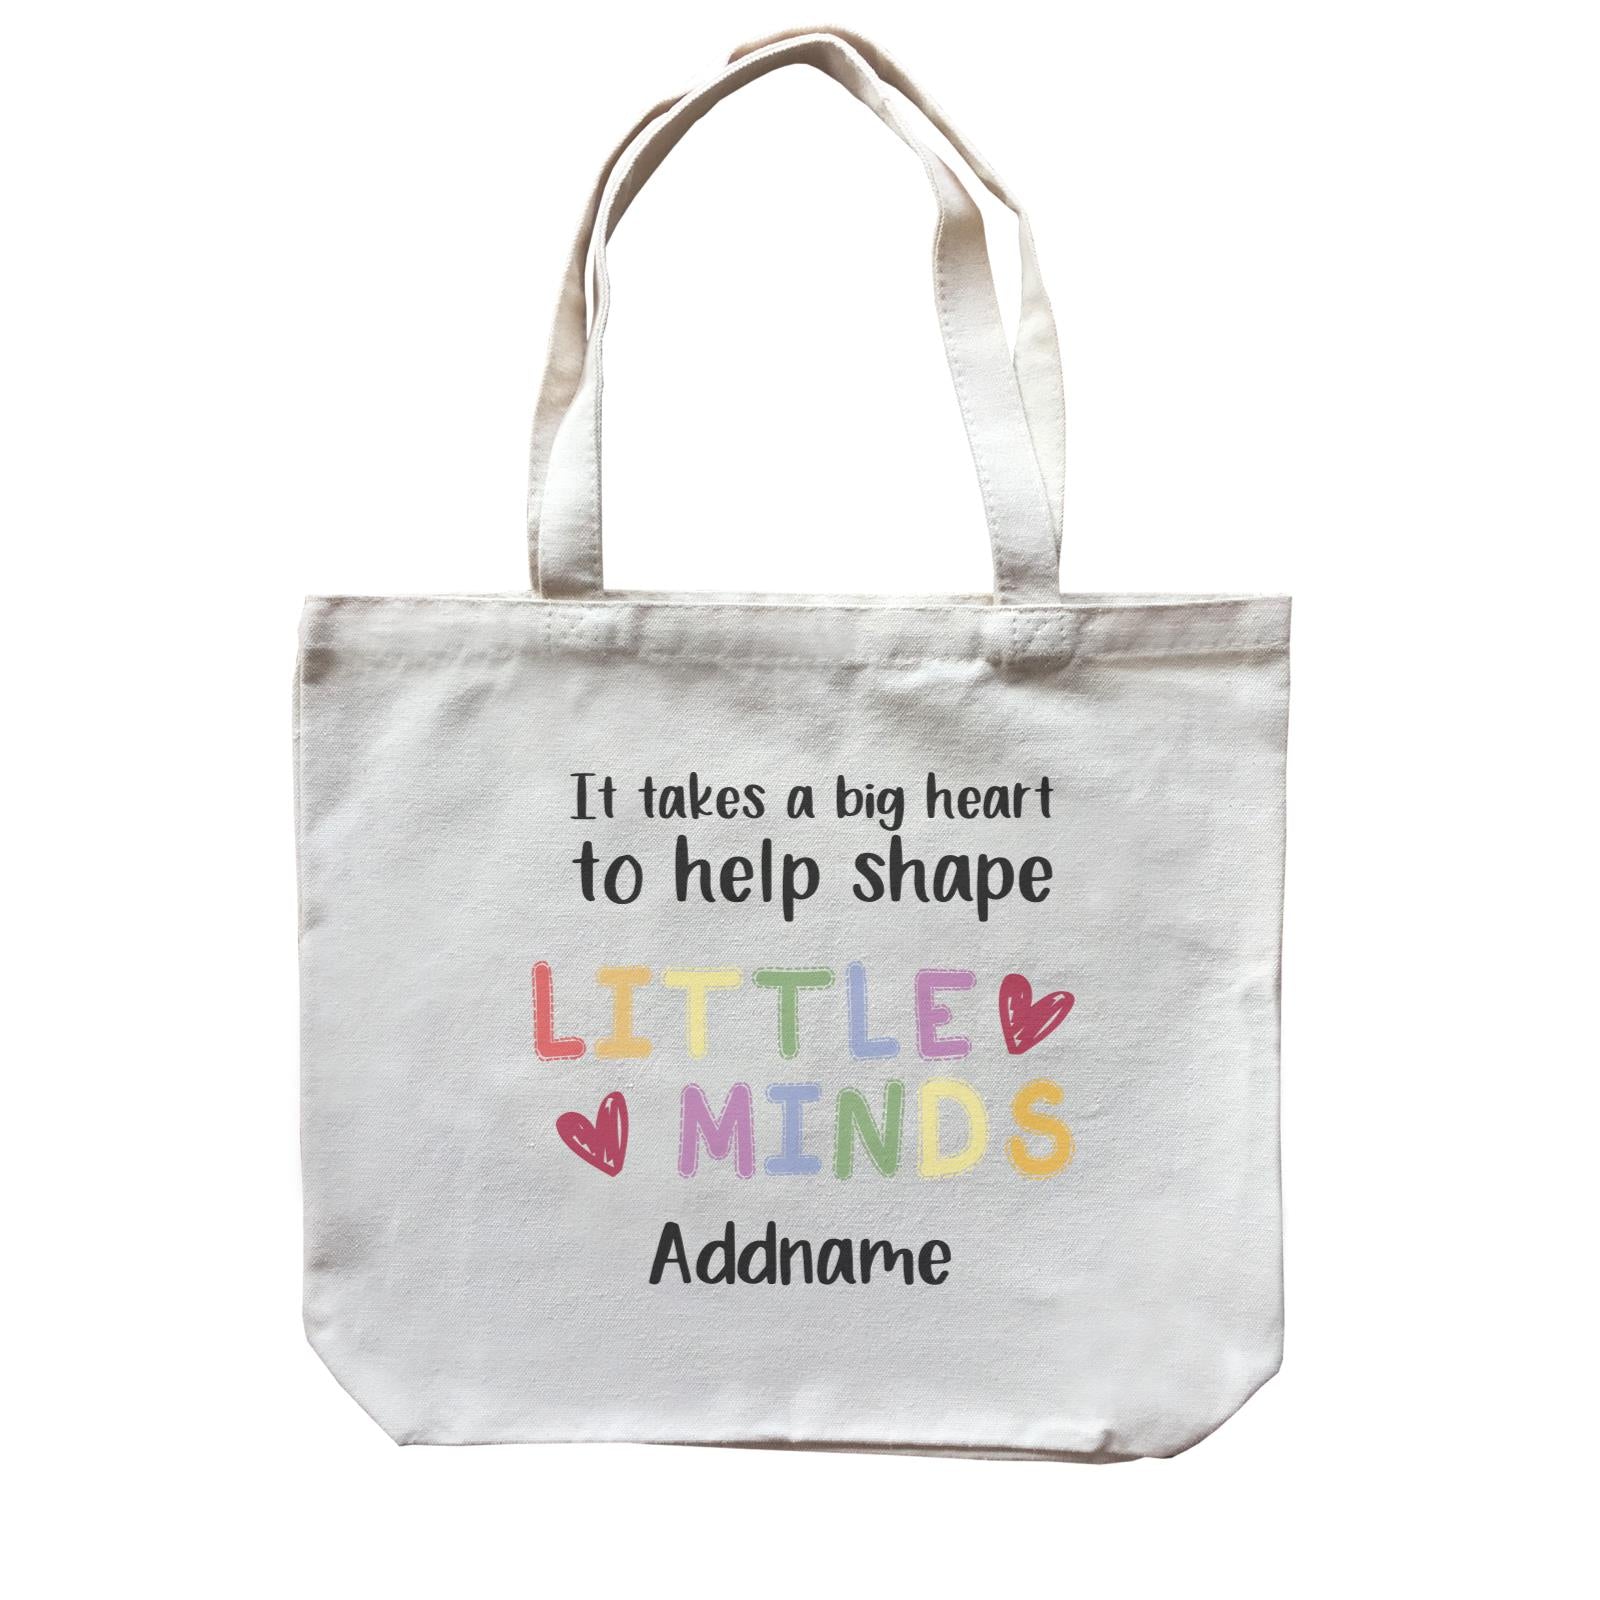 Teacher Quotes 2 It Takes A Big Heart To Help Shape Little Minds Addname Canvas Bag